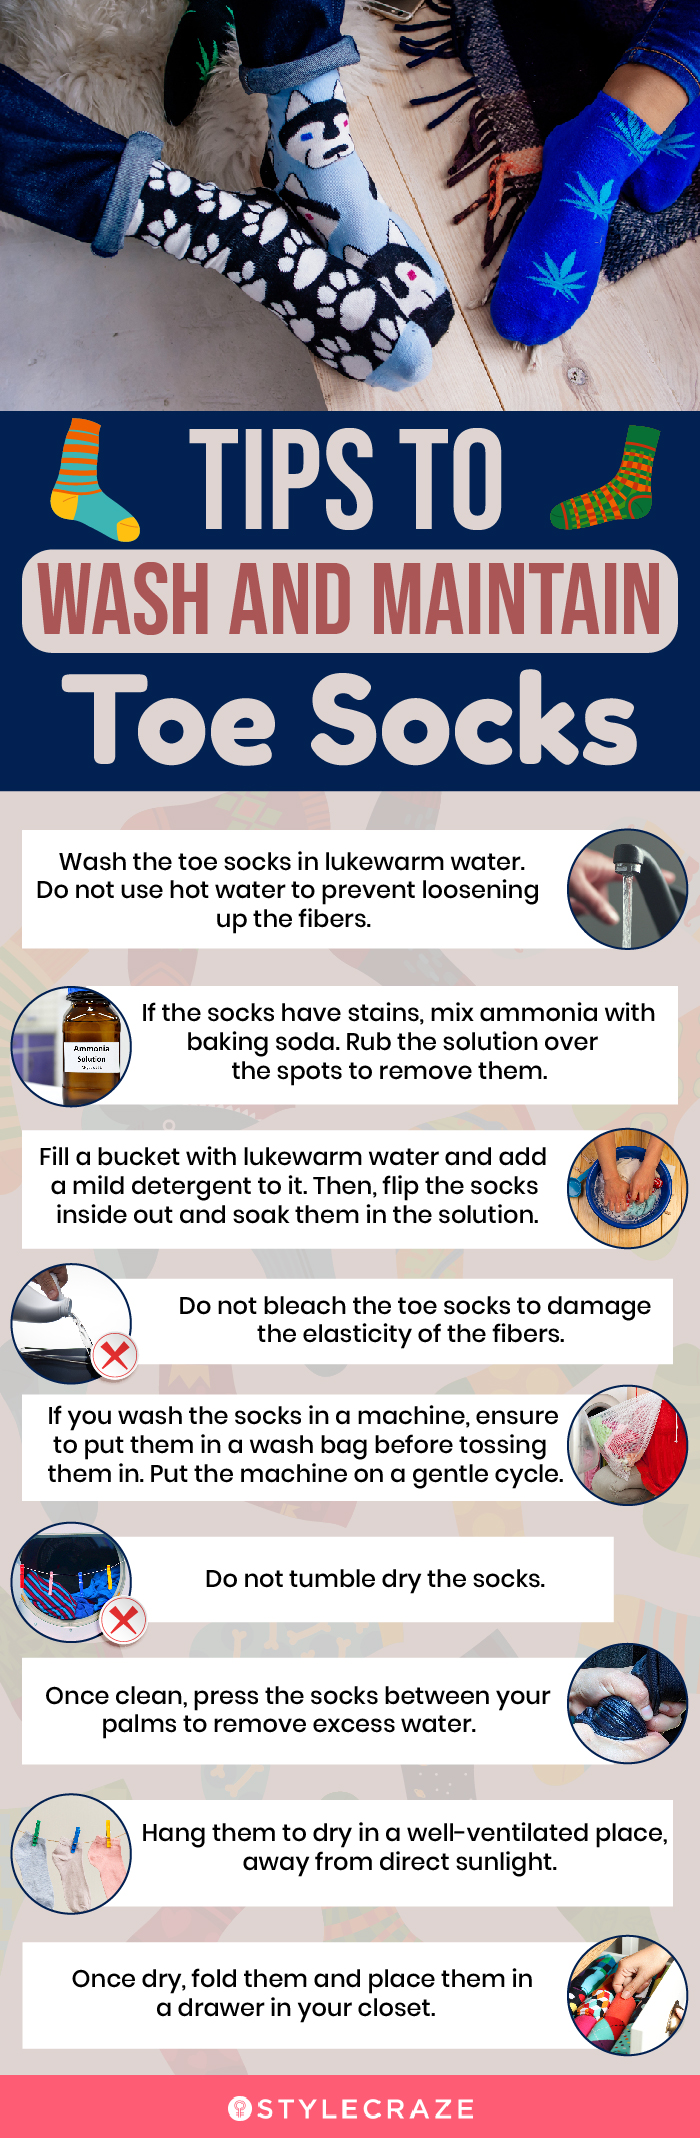 Tips To Wash And Maintain Toe Socks (infographic)